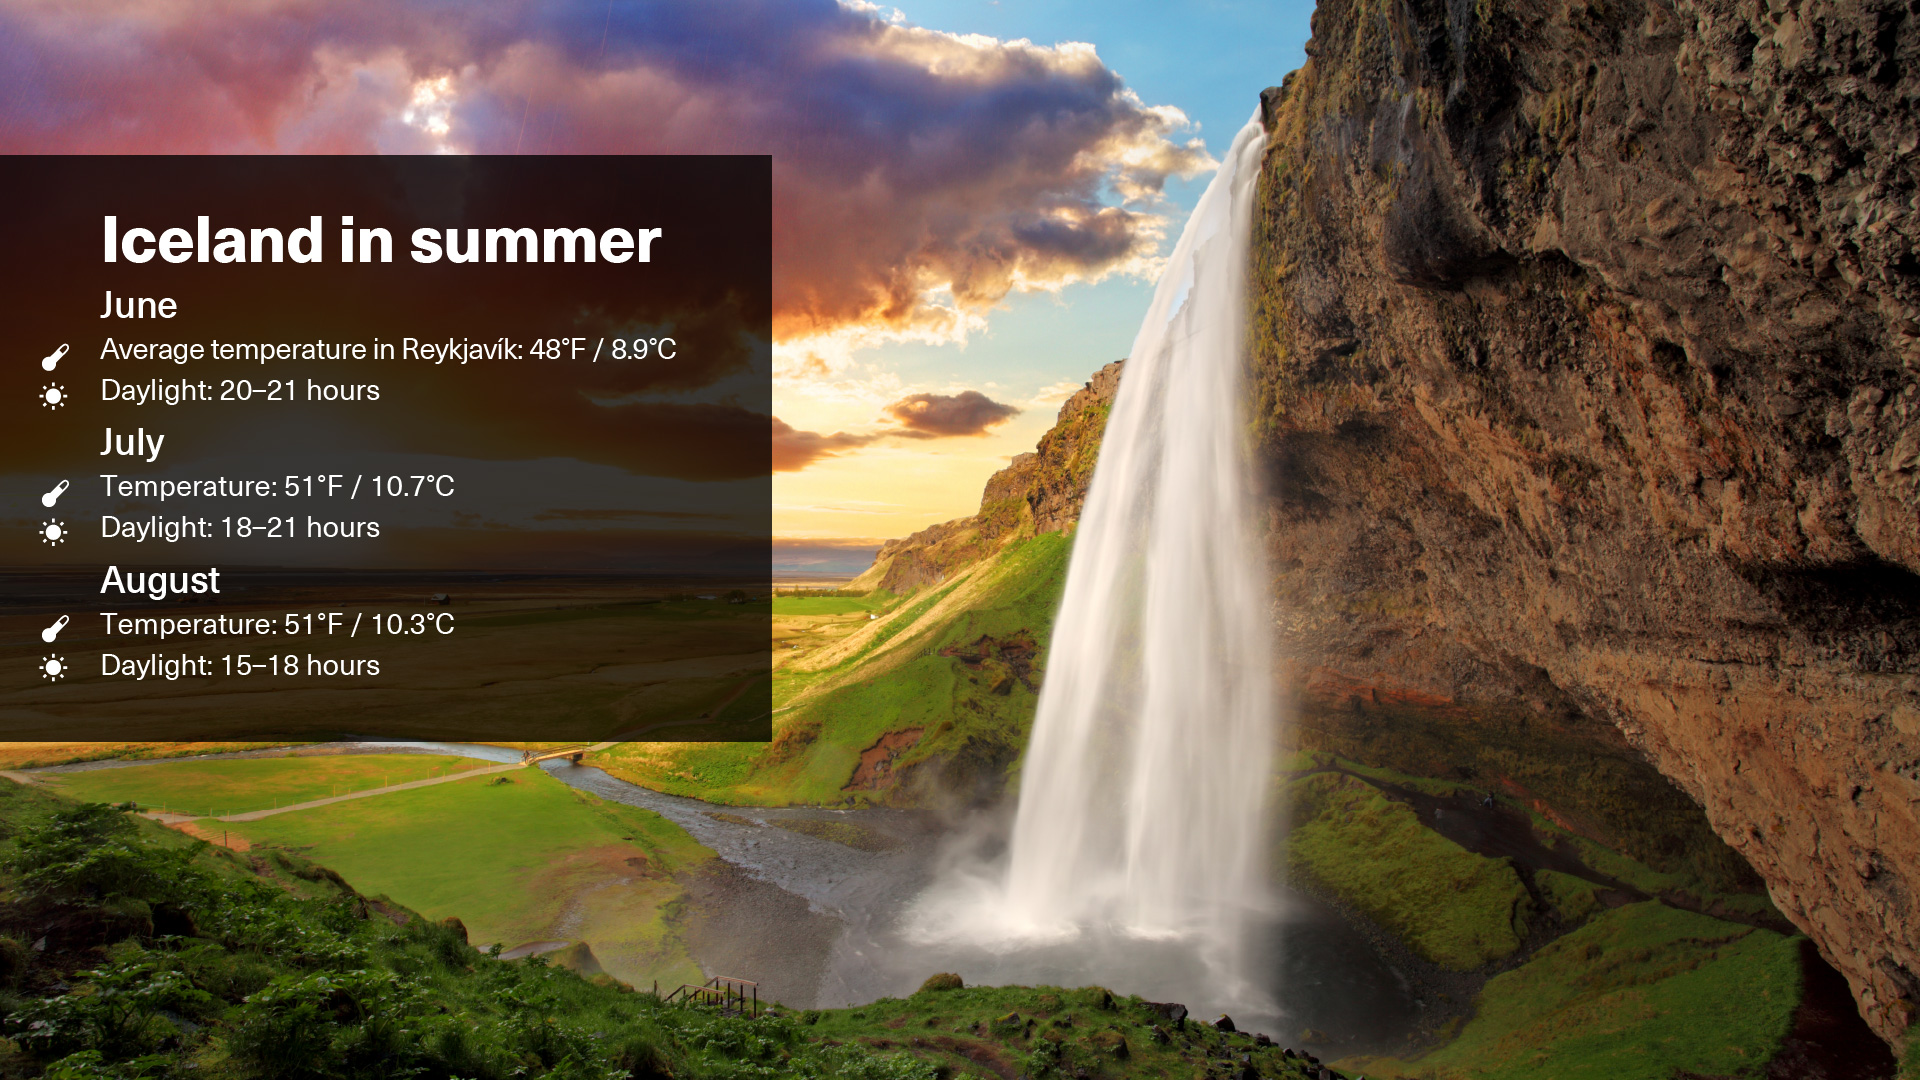 Summer weather in Iceland. Summer weather shown via an illustrative graphic with Seljalandsfoss waterfall pictured and text overleaf that displays the weather and daylight hours in June, July and August in Iceland